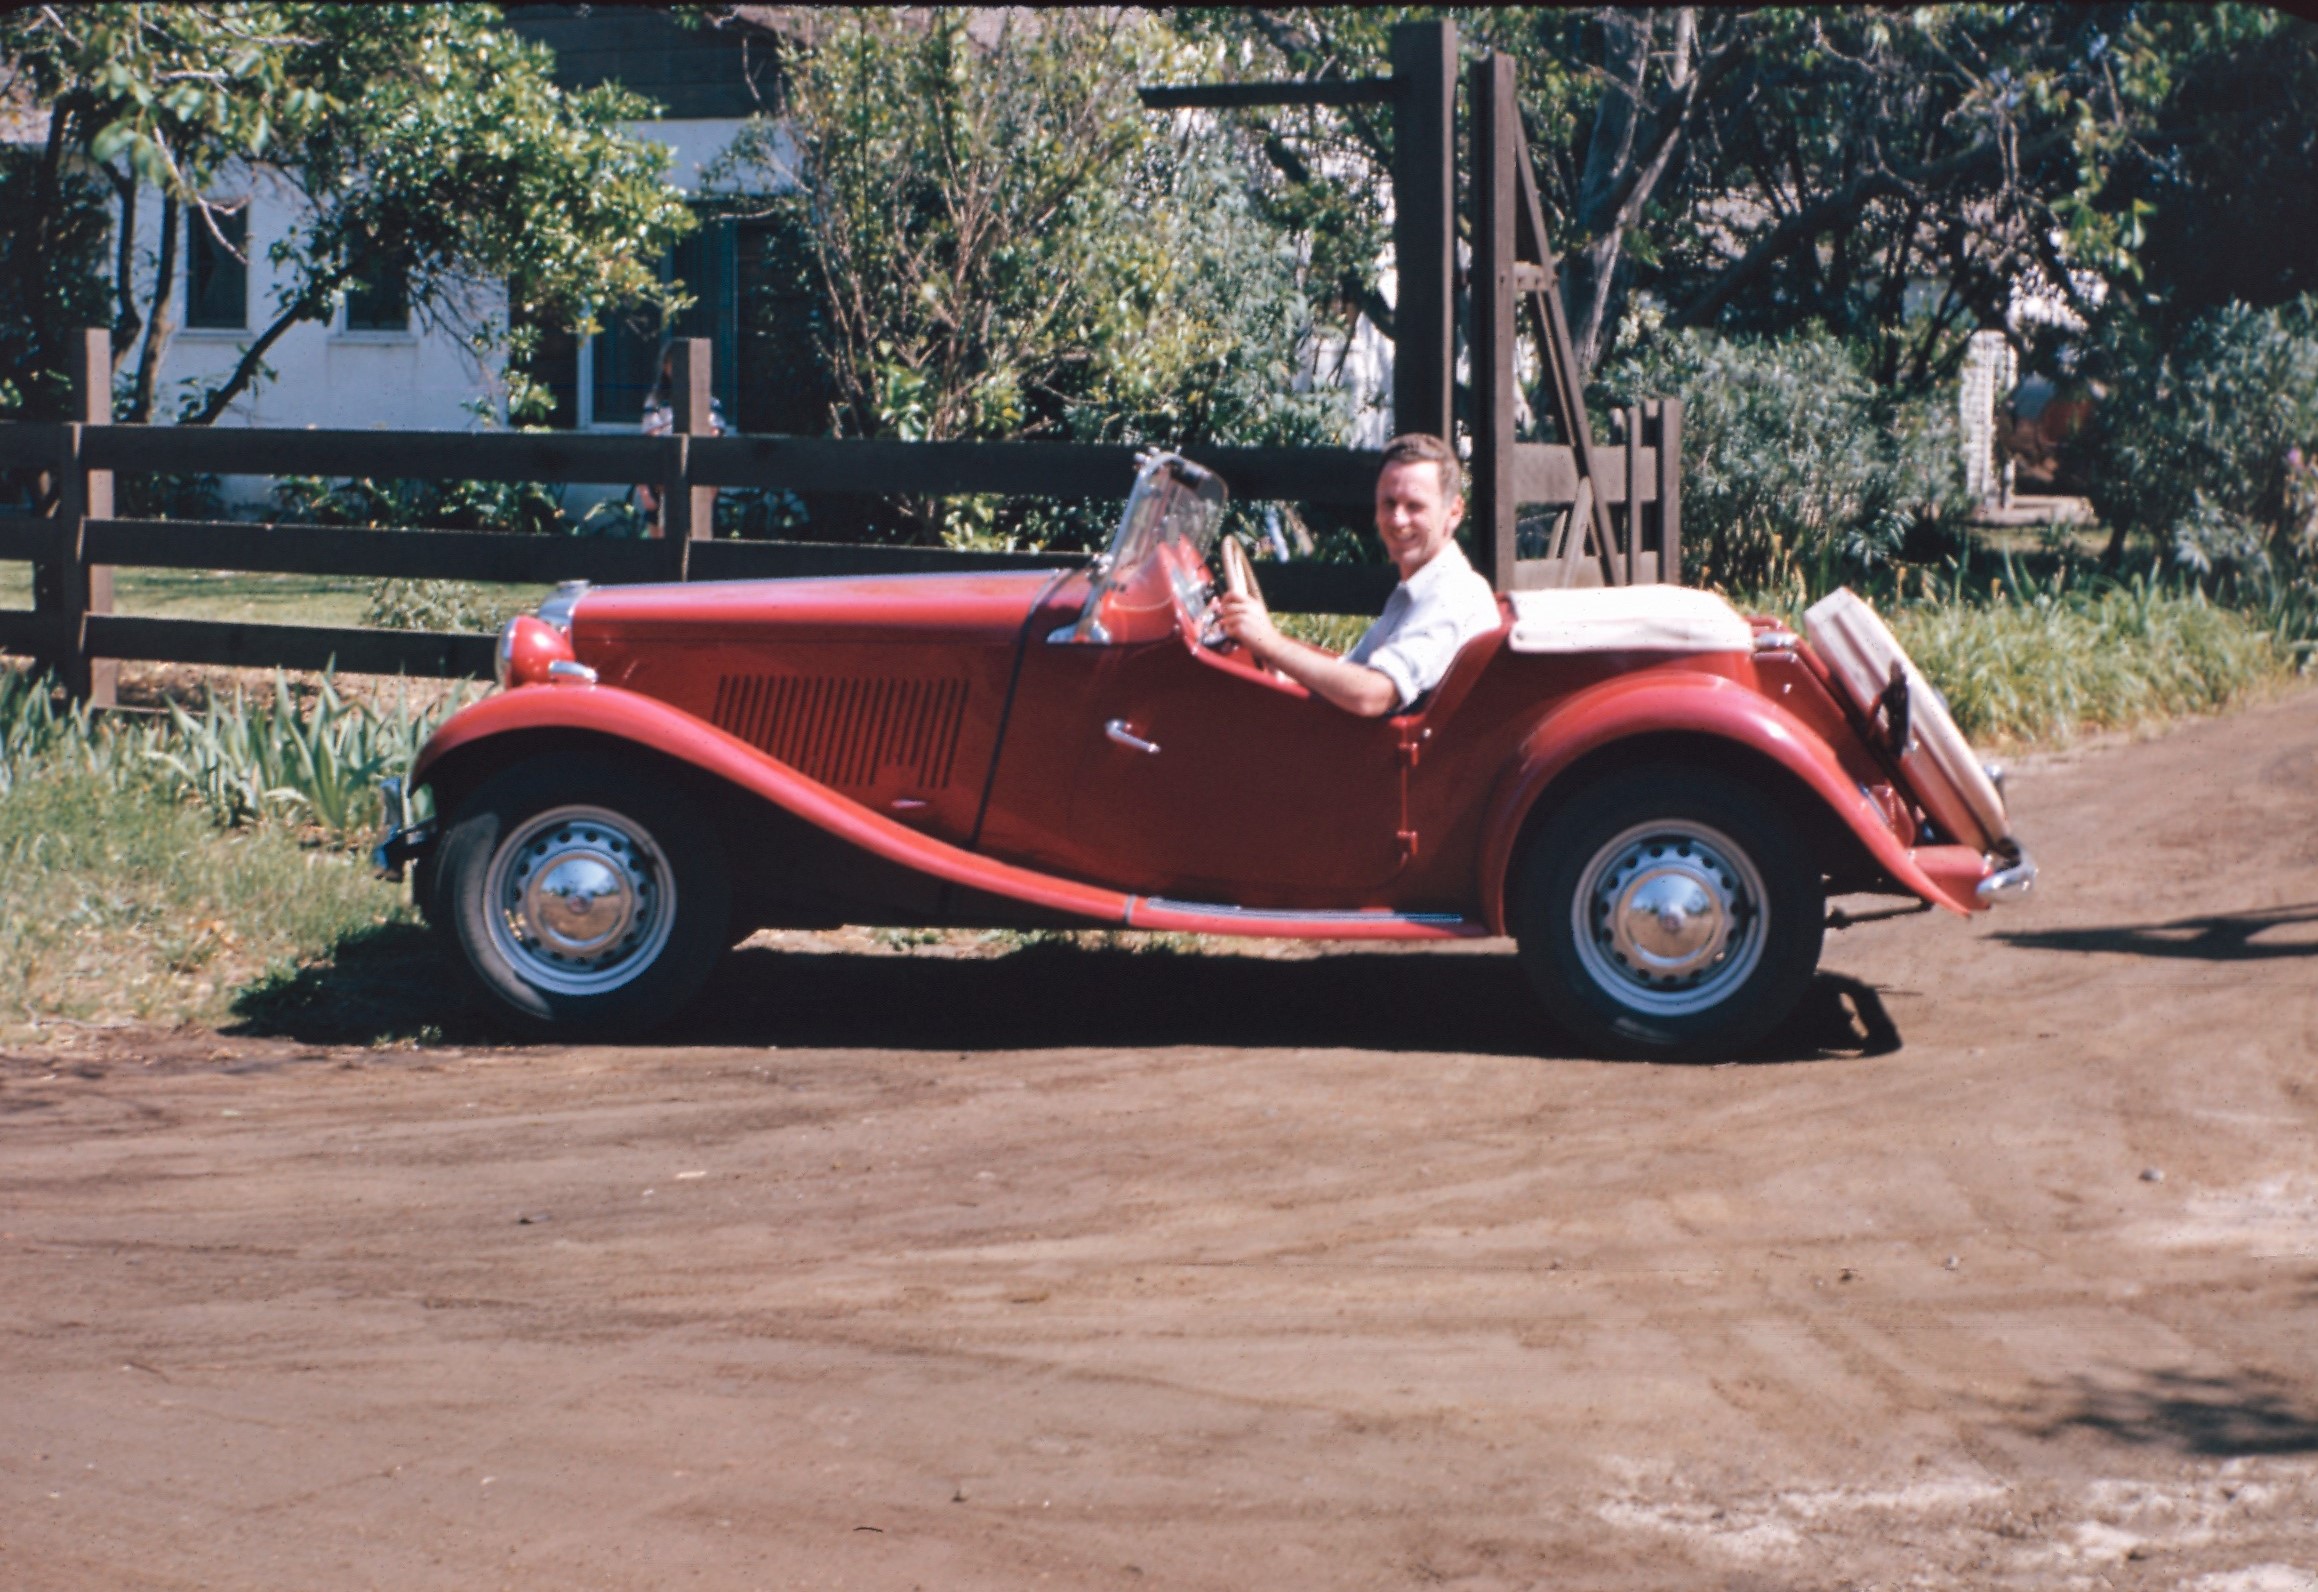 Brand new 1952 MGTD. Note the missing rear overrider.